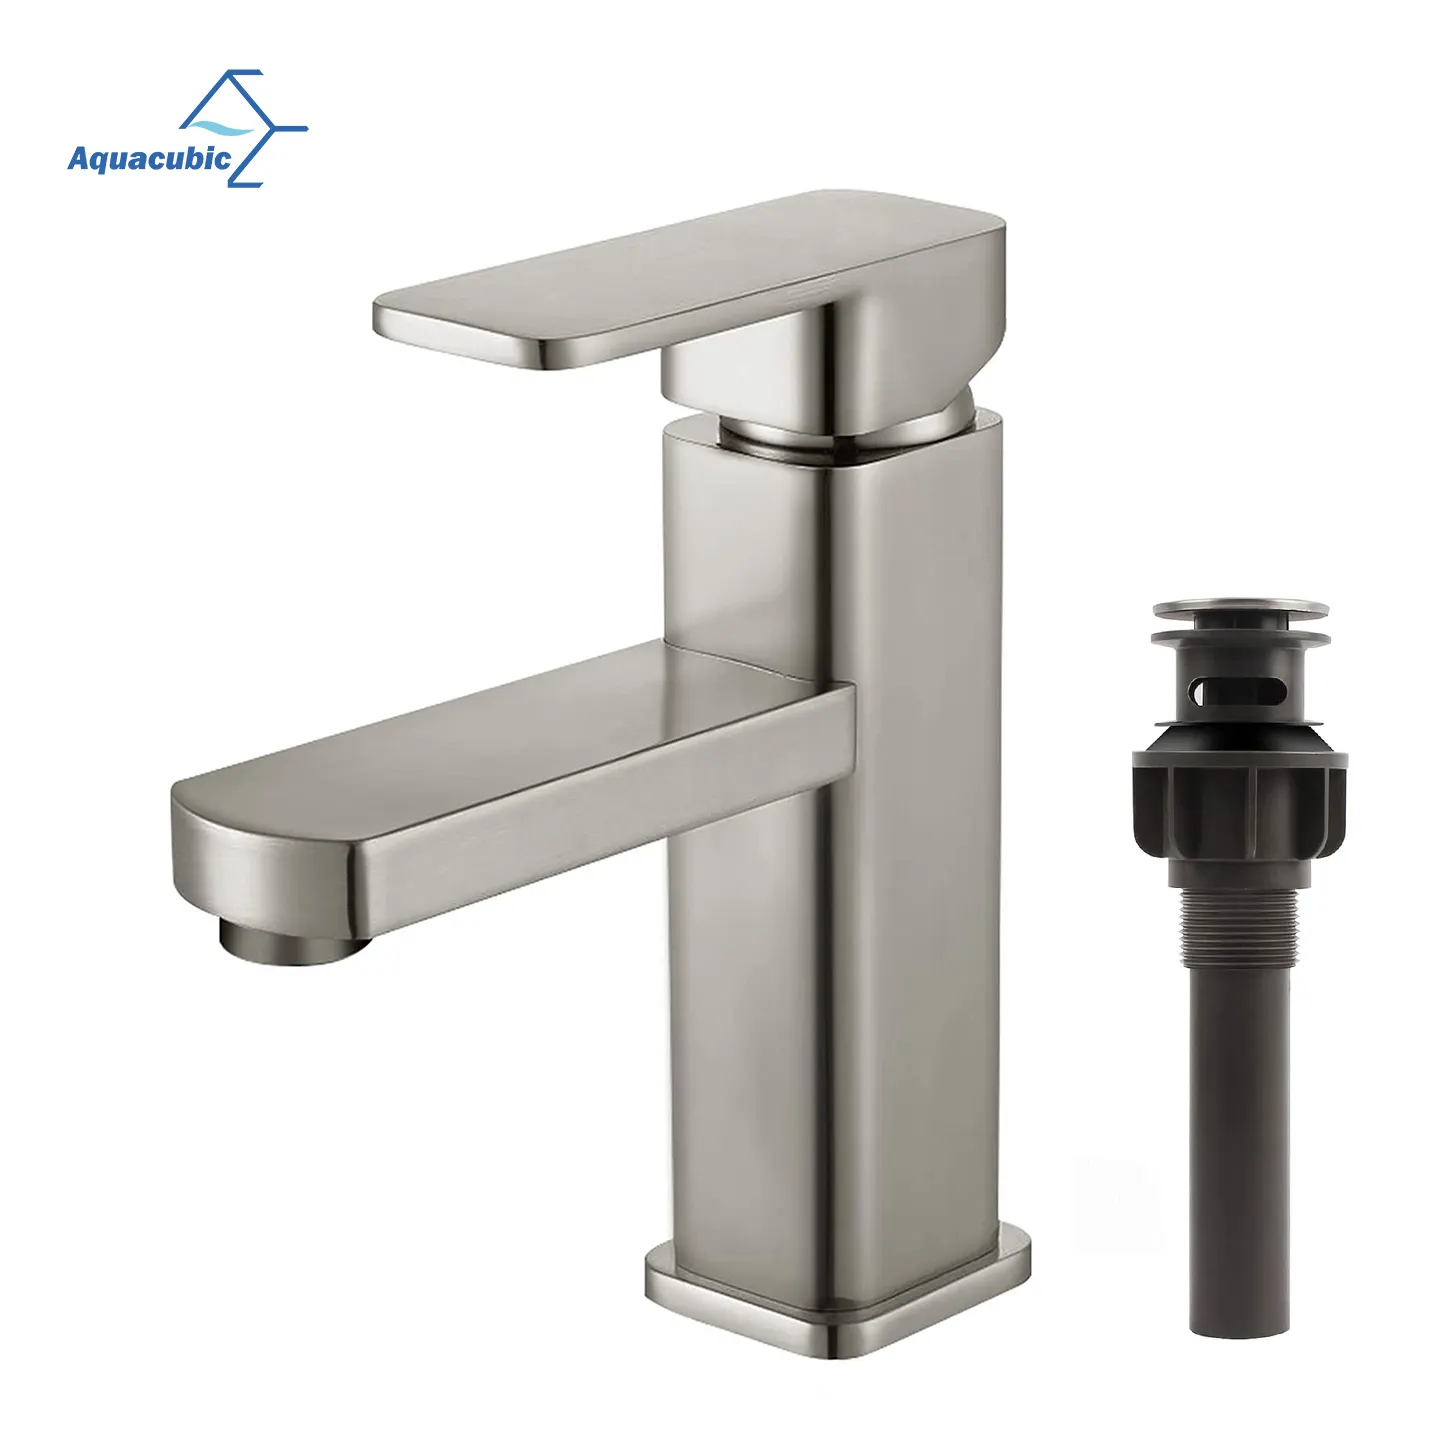 Modern Design Bathroom Faucet Nickel Brushed Surface Single Hole Bathroom Sink Faucet In Stock